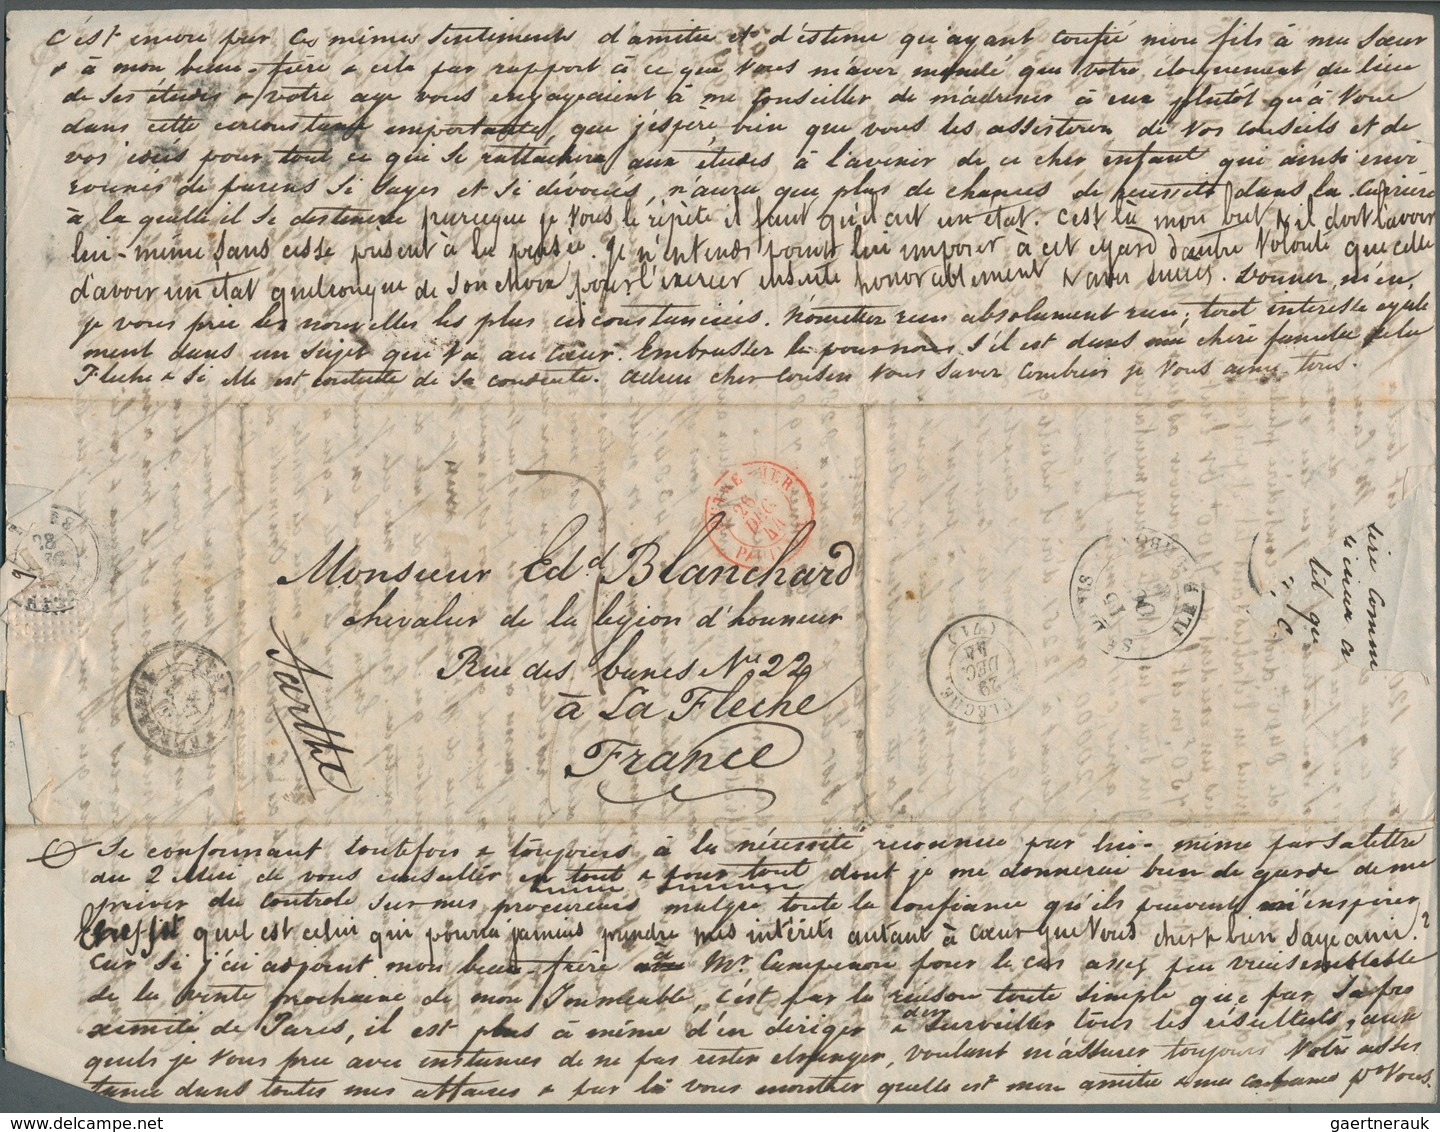 23647 Mauritius: 1844/57 (ca.) A scarce correspondance with ca. 32 stampless entire letters from a sender,